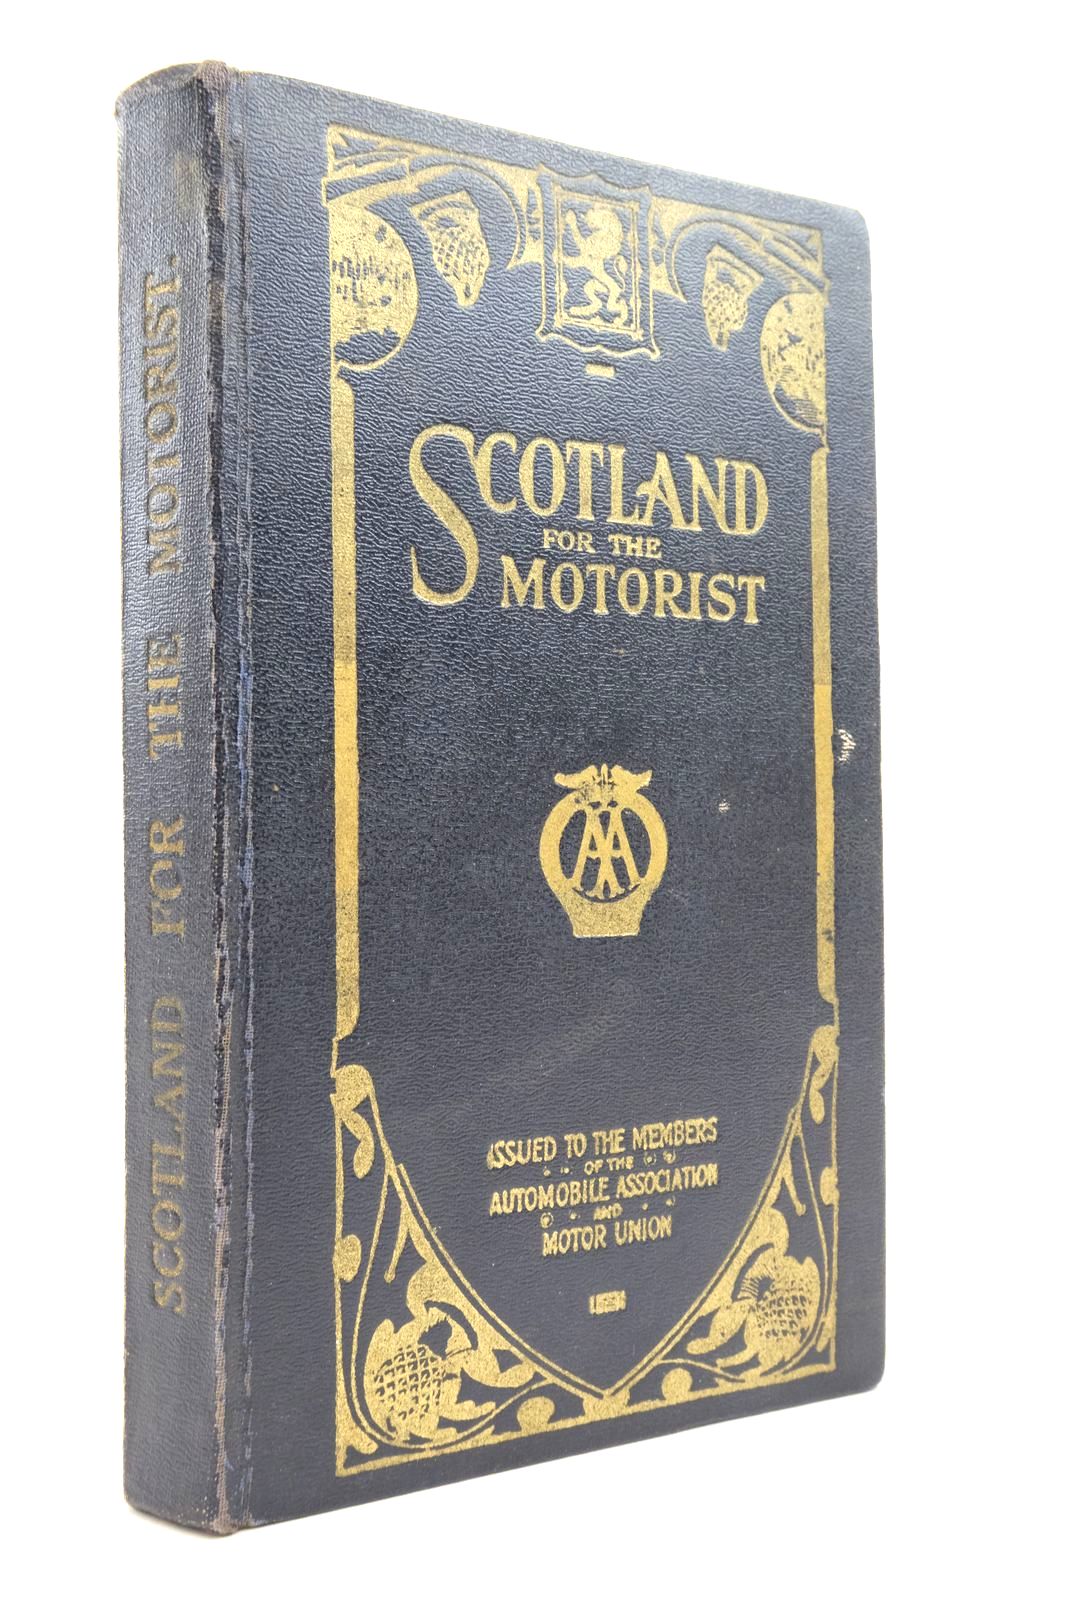 Photo of SCOTLAND FOR THE MOTORIST written by Ker, J. Inglis published by The Automobile Association (STOCK CODE: 2137686)  for sale by Stella & Rose's Books